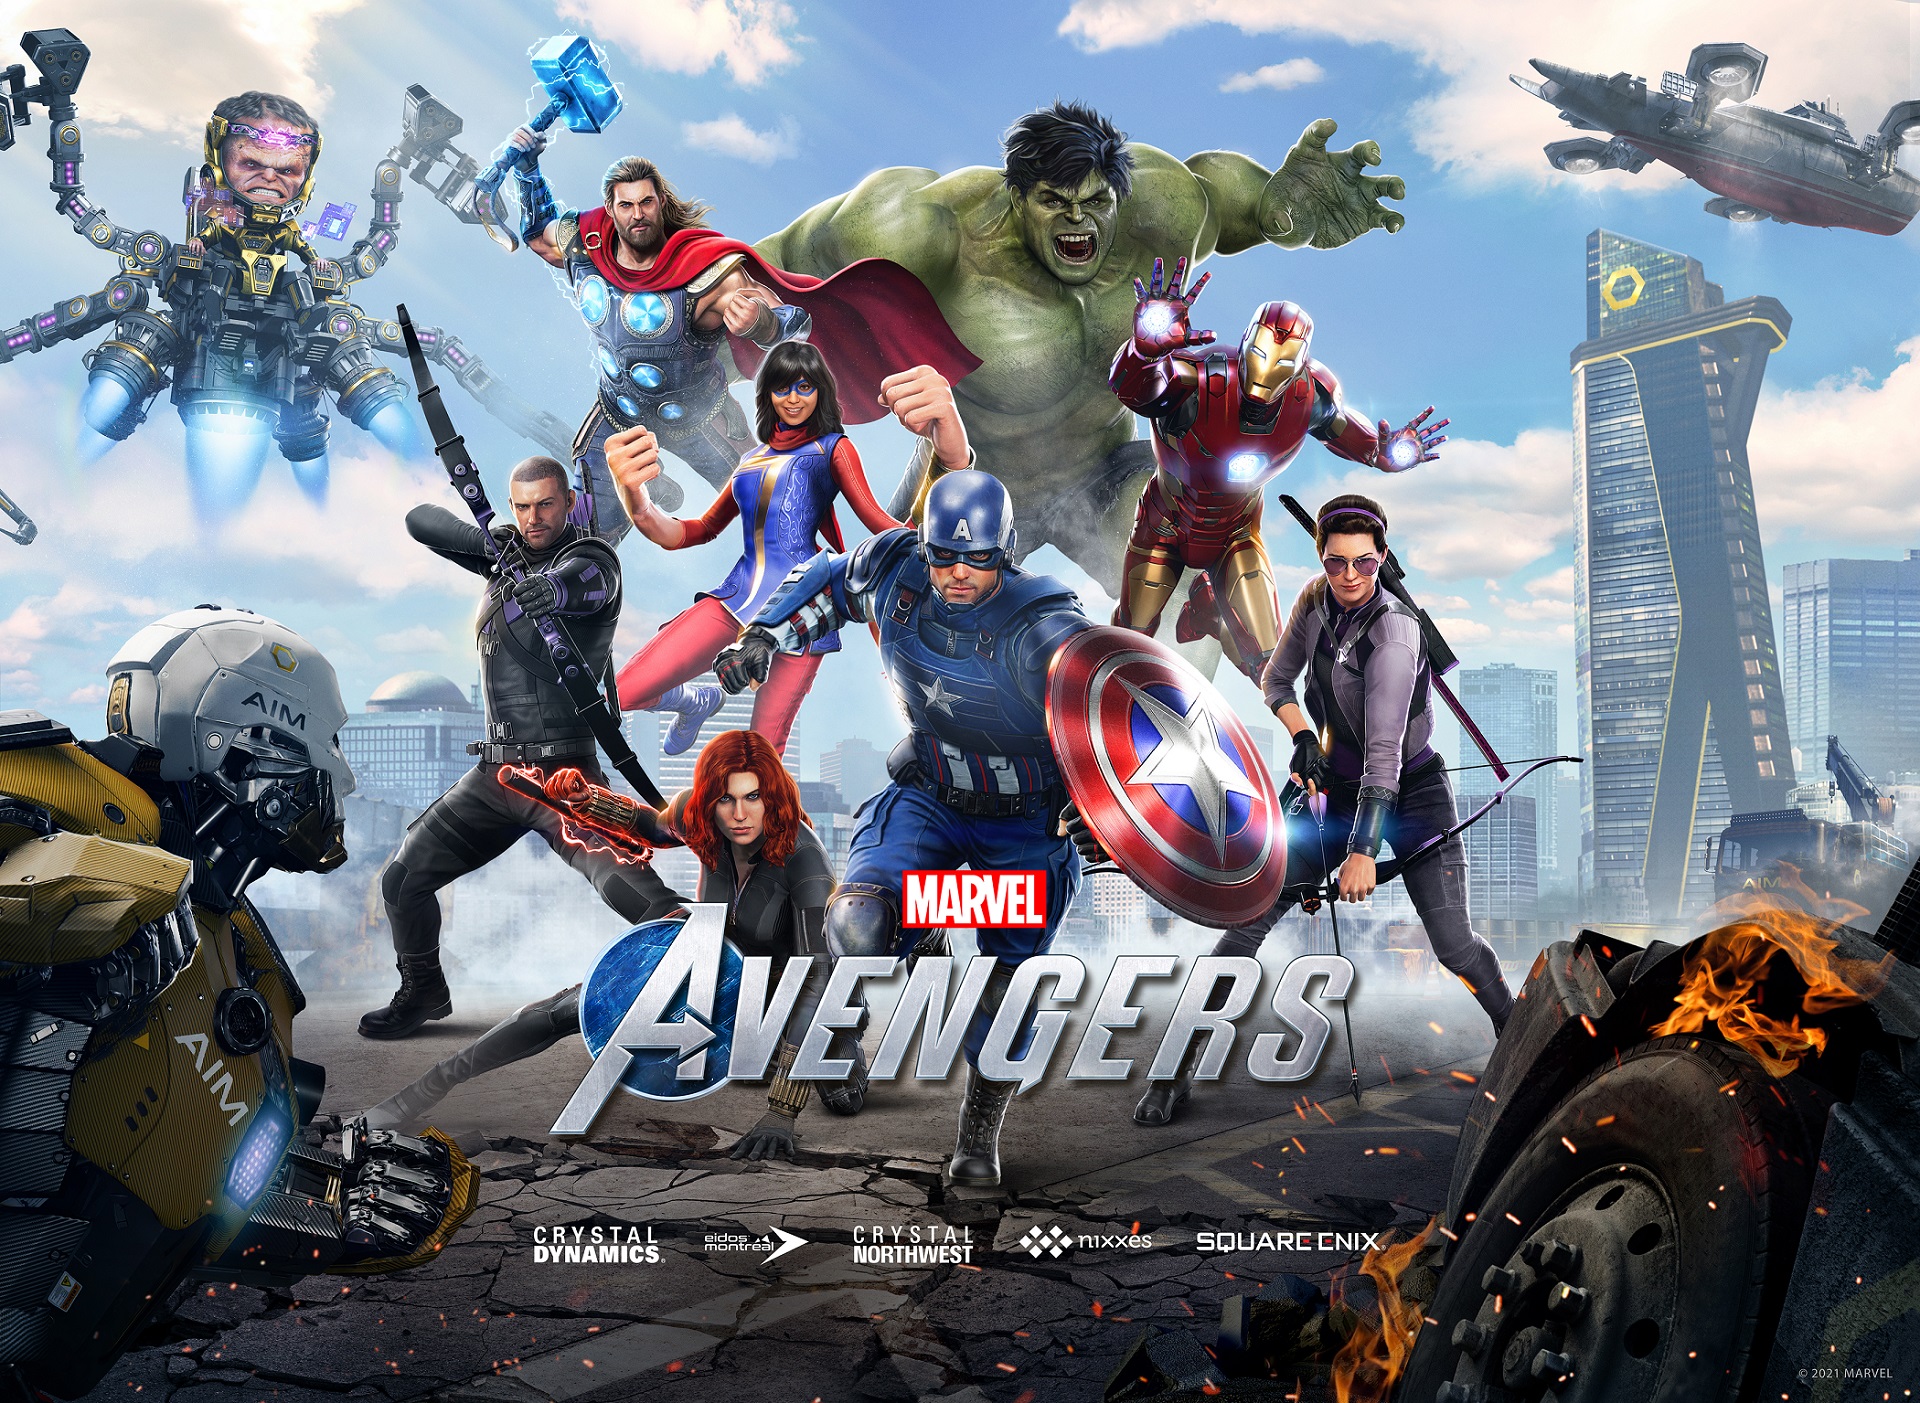 Marvel’s Avengers will be free to play this weekend